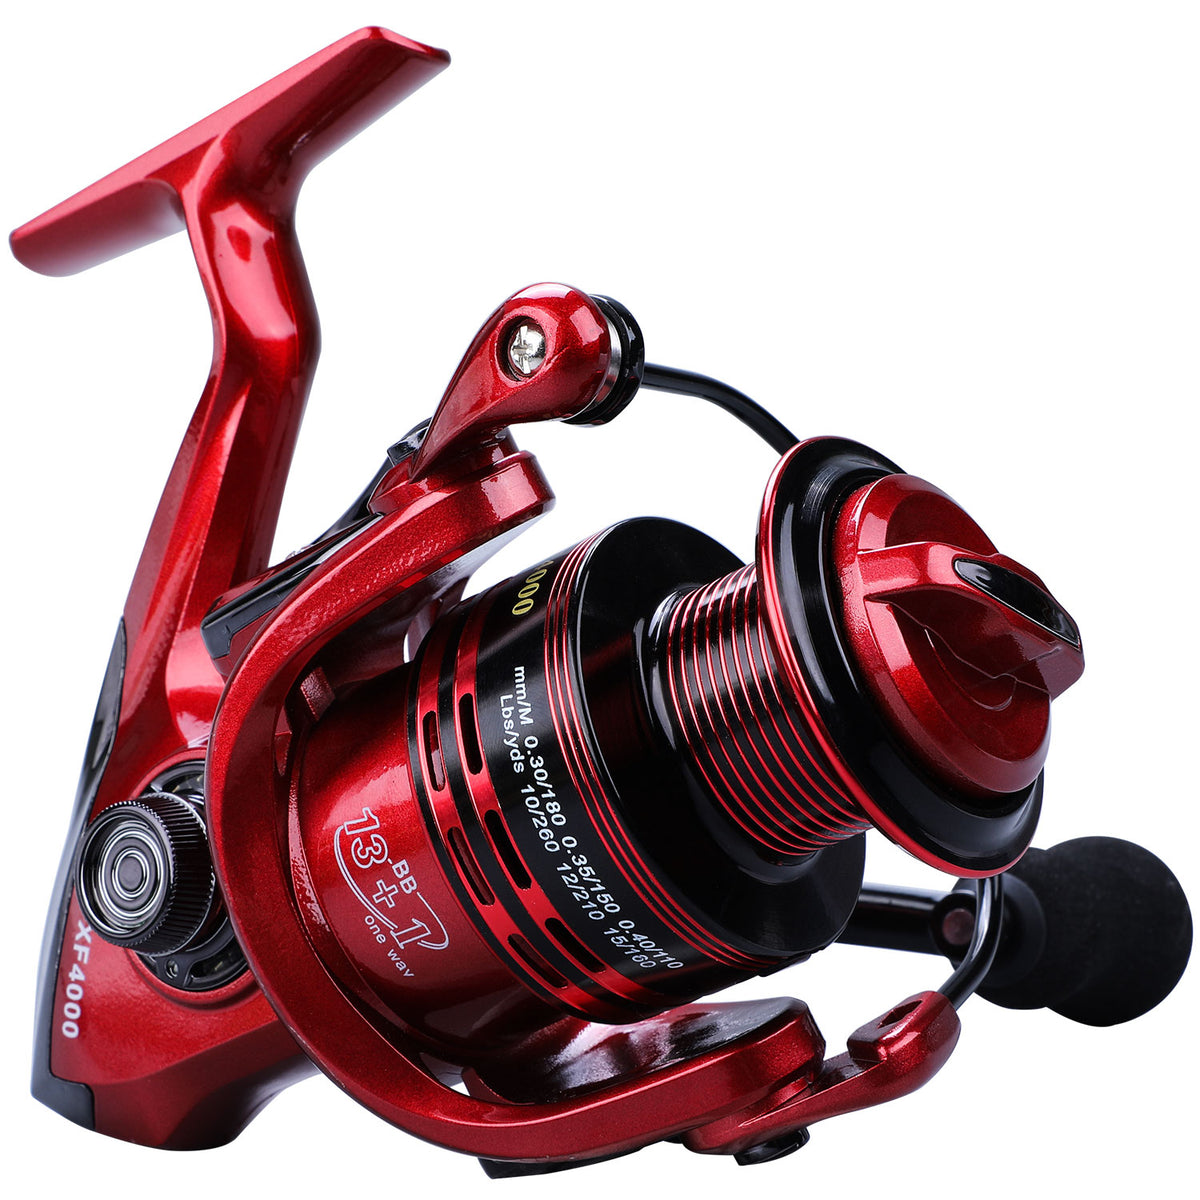 Sougayilang Spinning Fishing Reel Light Weight 6.2:1 High-Speed Gear Ratio  with 12+1 Stainless BB and CNC Aluminum Spool for …